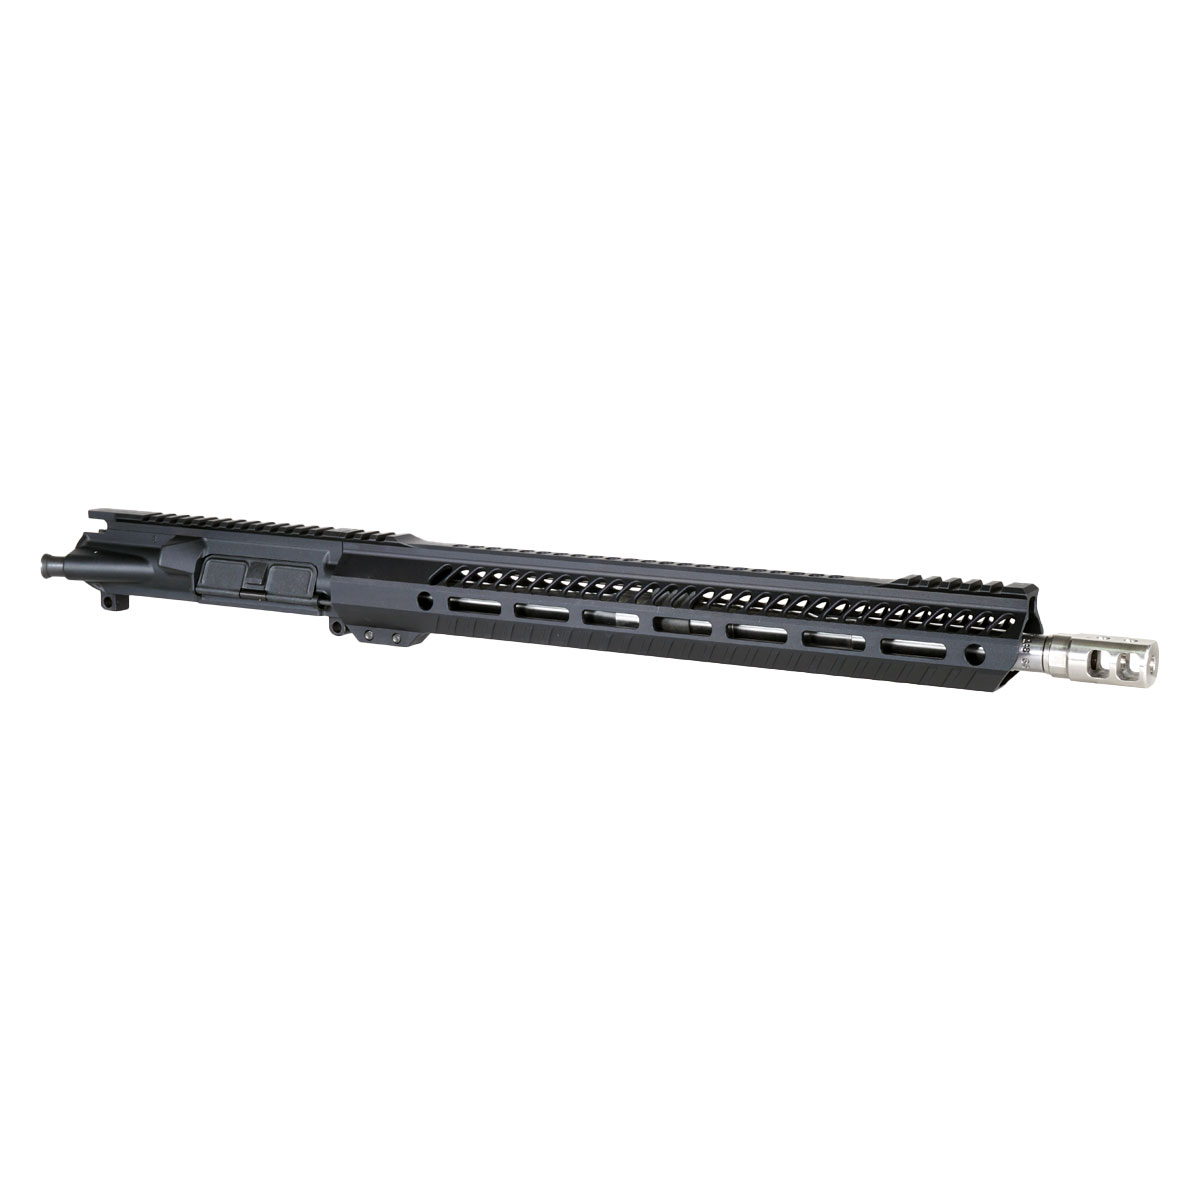 DD 'Silver Sentinel' 16-inch AR-15 5.56 NATO Stainless Rifle Upper Build Kit